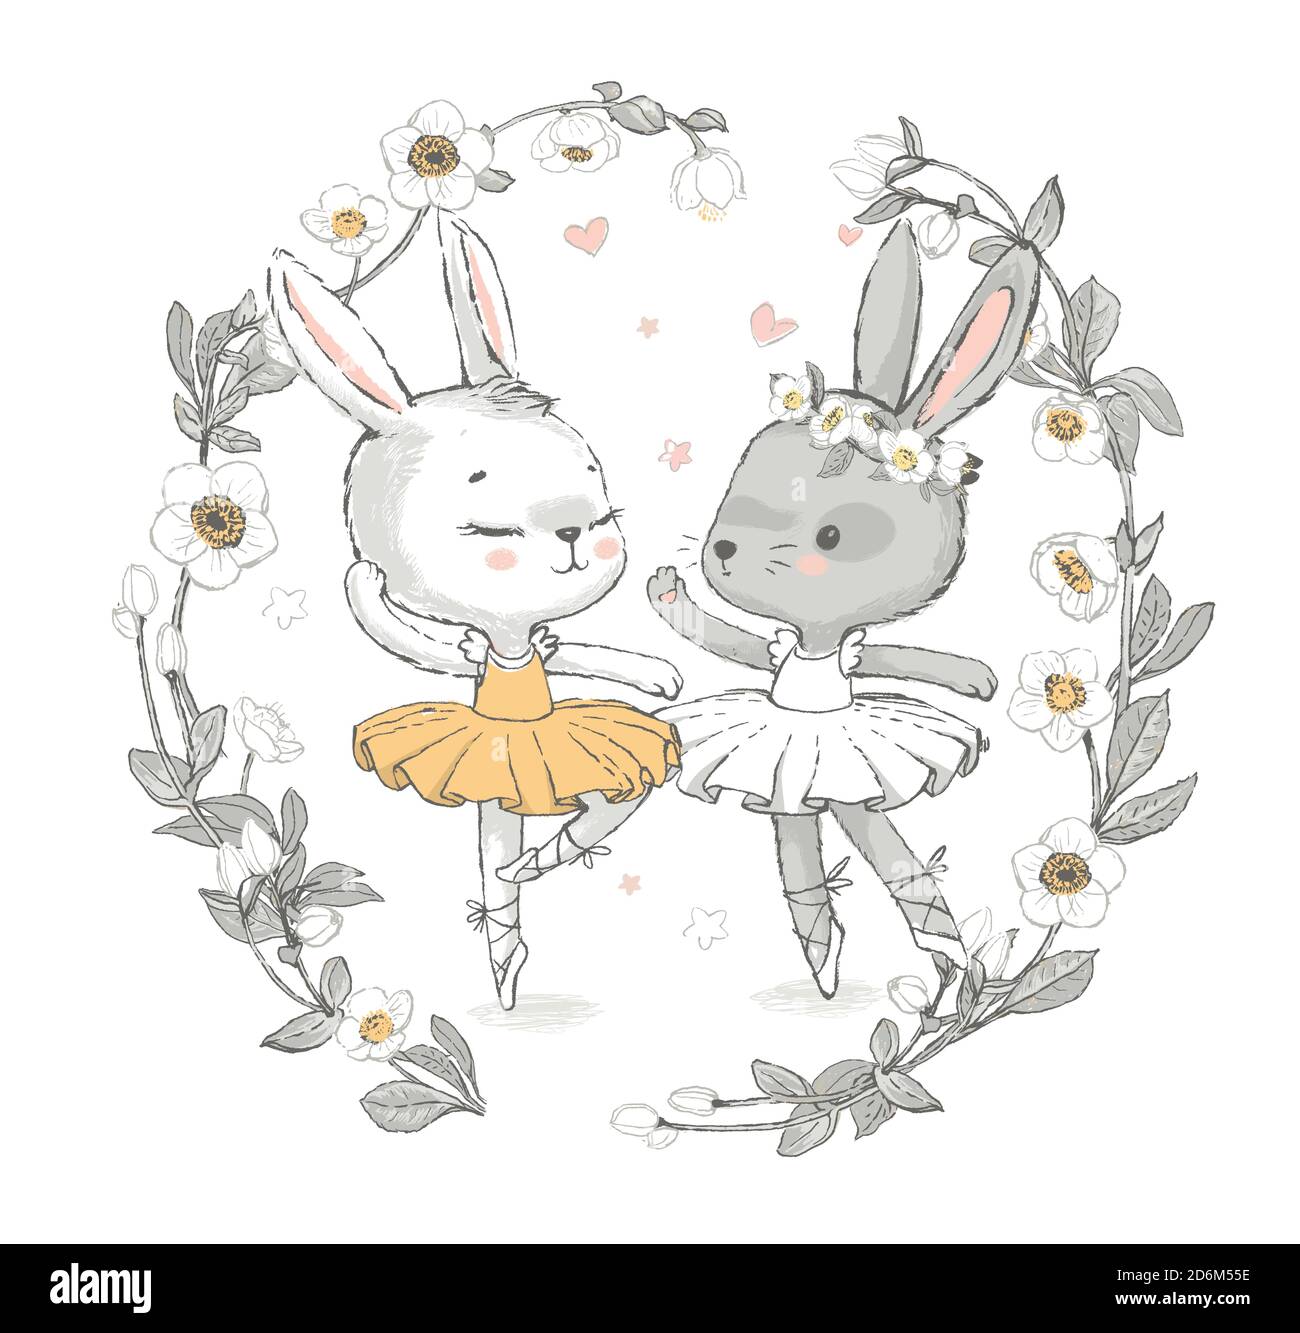 Illustration of two grey and white dancing ballerina bunnyes. Little rabbits girls dancing. Wreath with beautiful flowers in the background. Can be Stock Vector